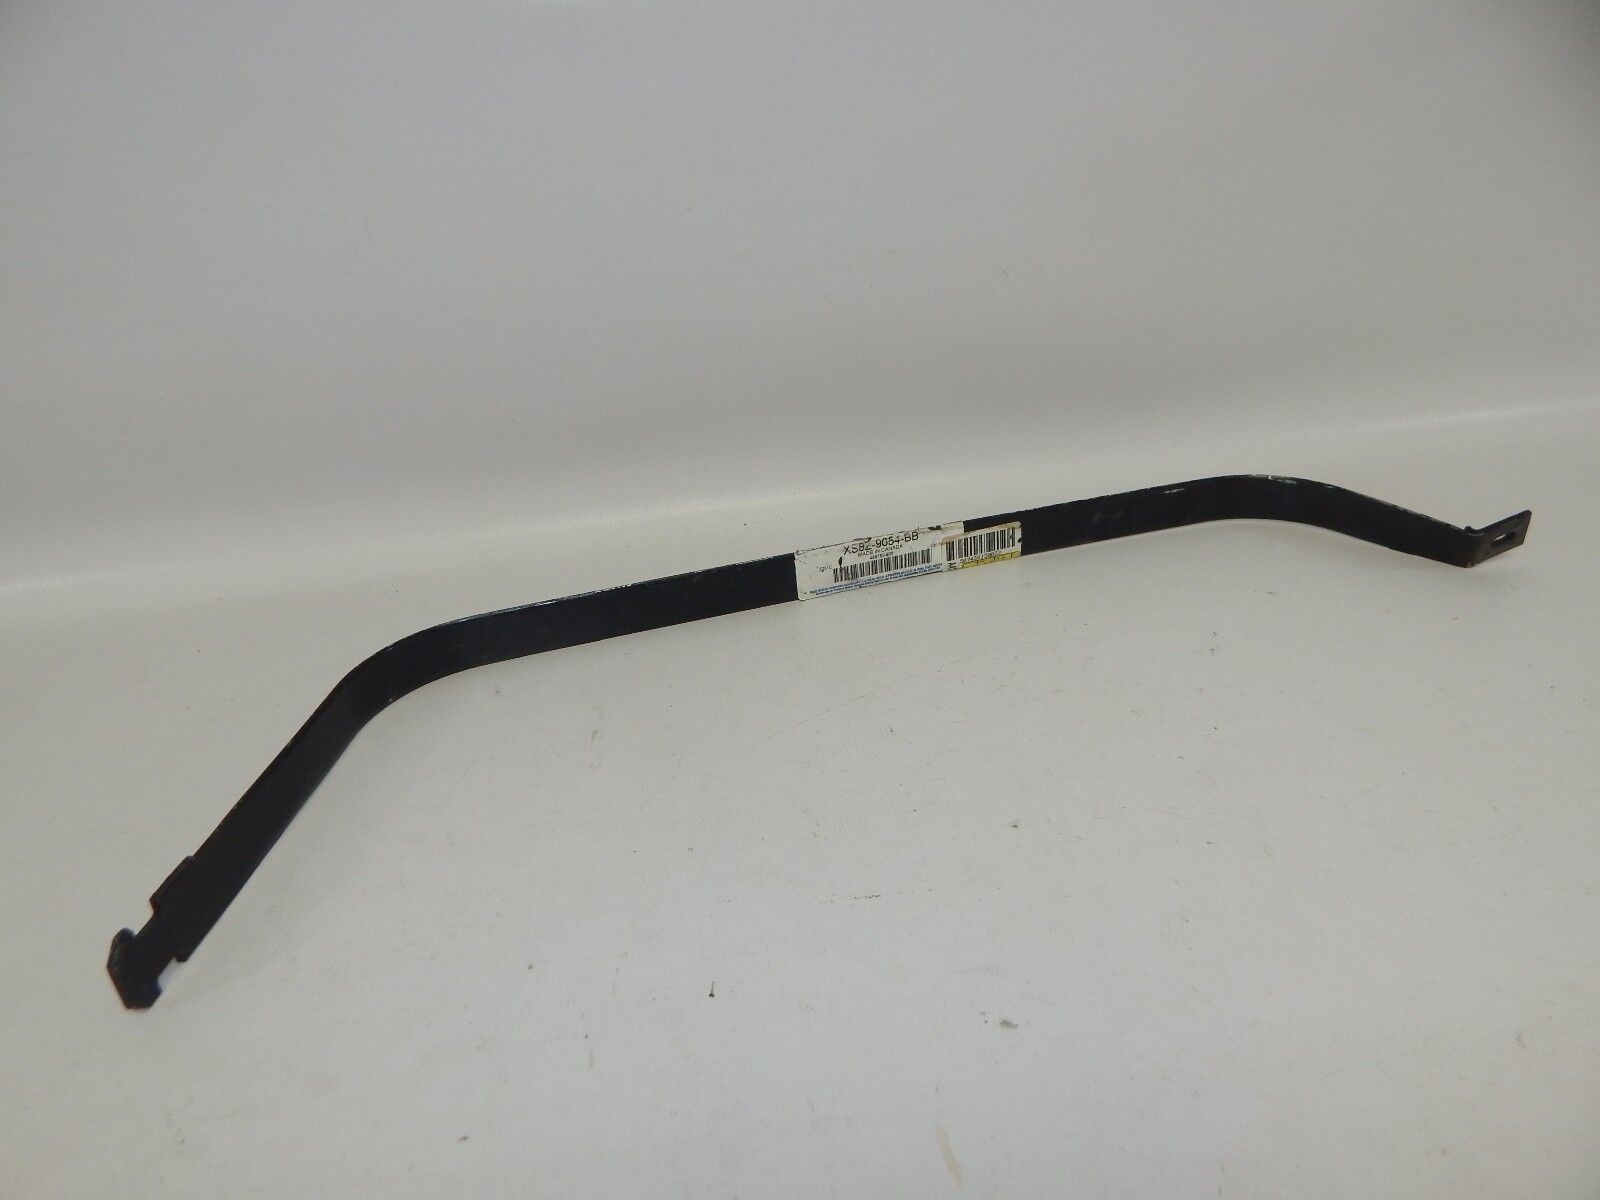 New OEM 1999-2002 Mercury Cougar Fuel Tank Strap Assembly Right Hand Side RH